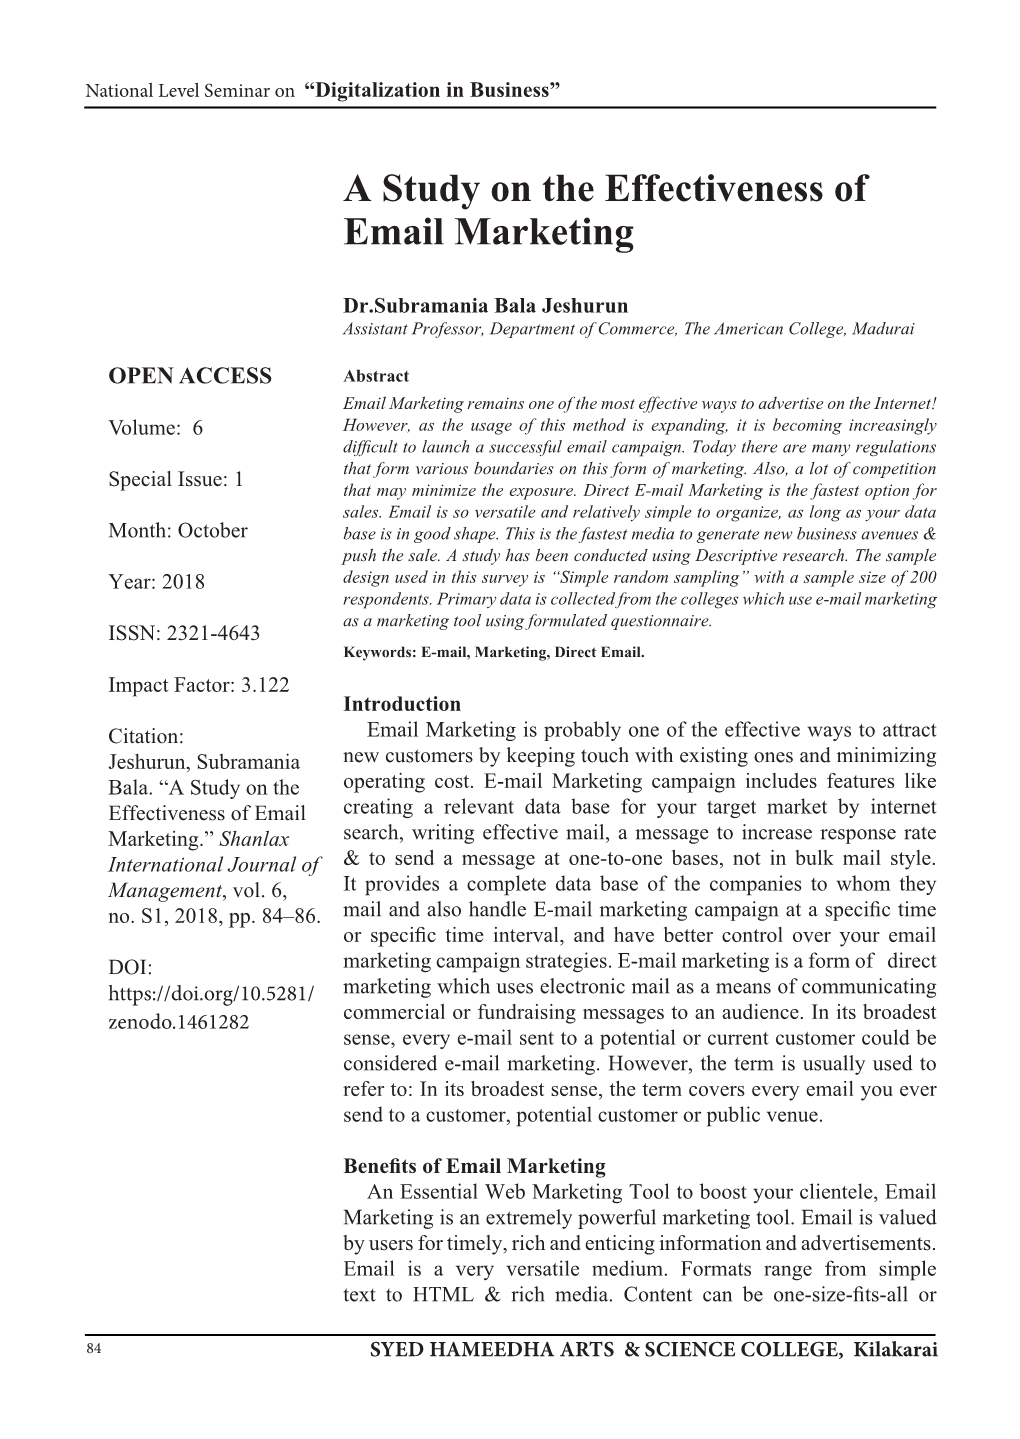 A Study on the Effectiveness of Email Marketing